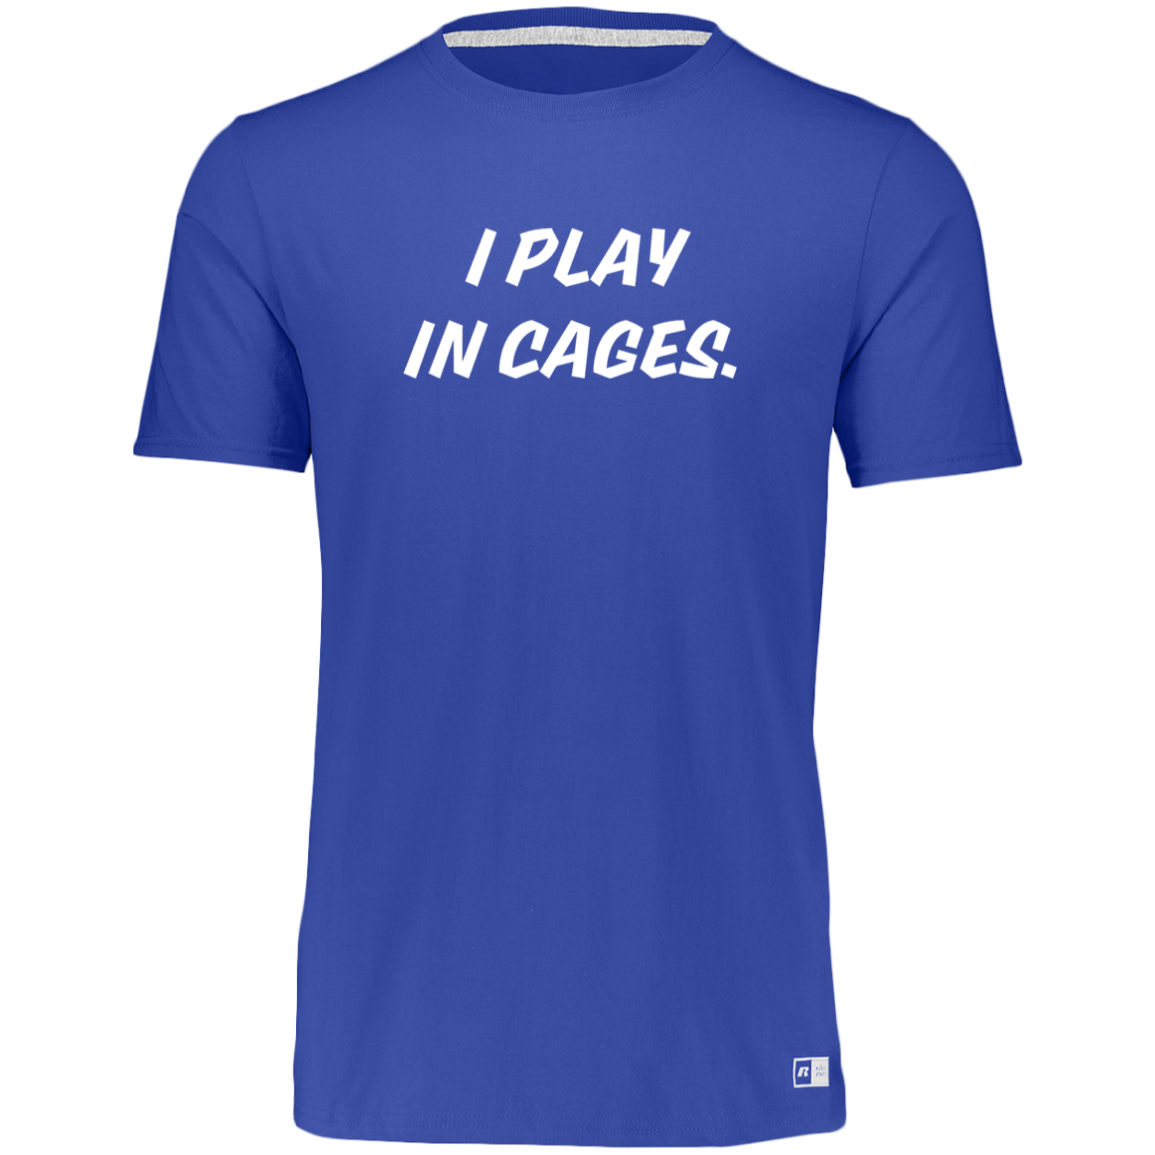 In Cages Dri-Power Tee